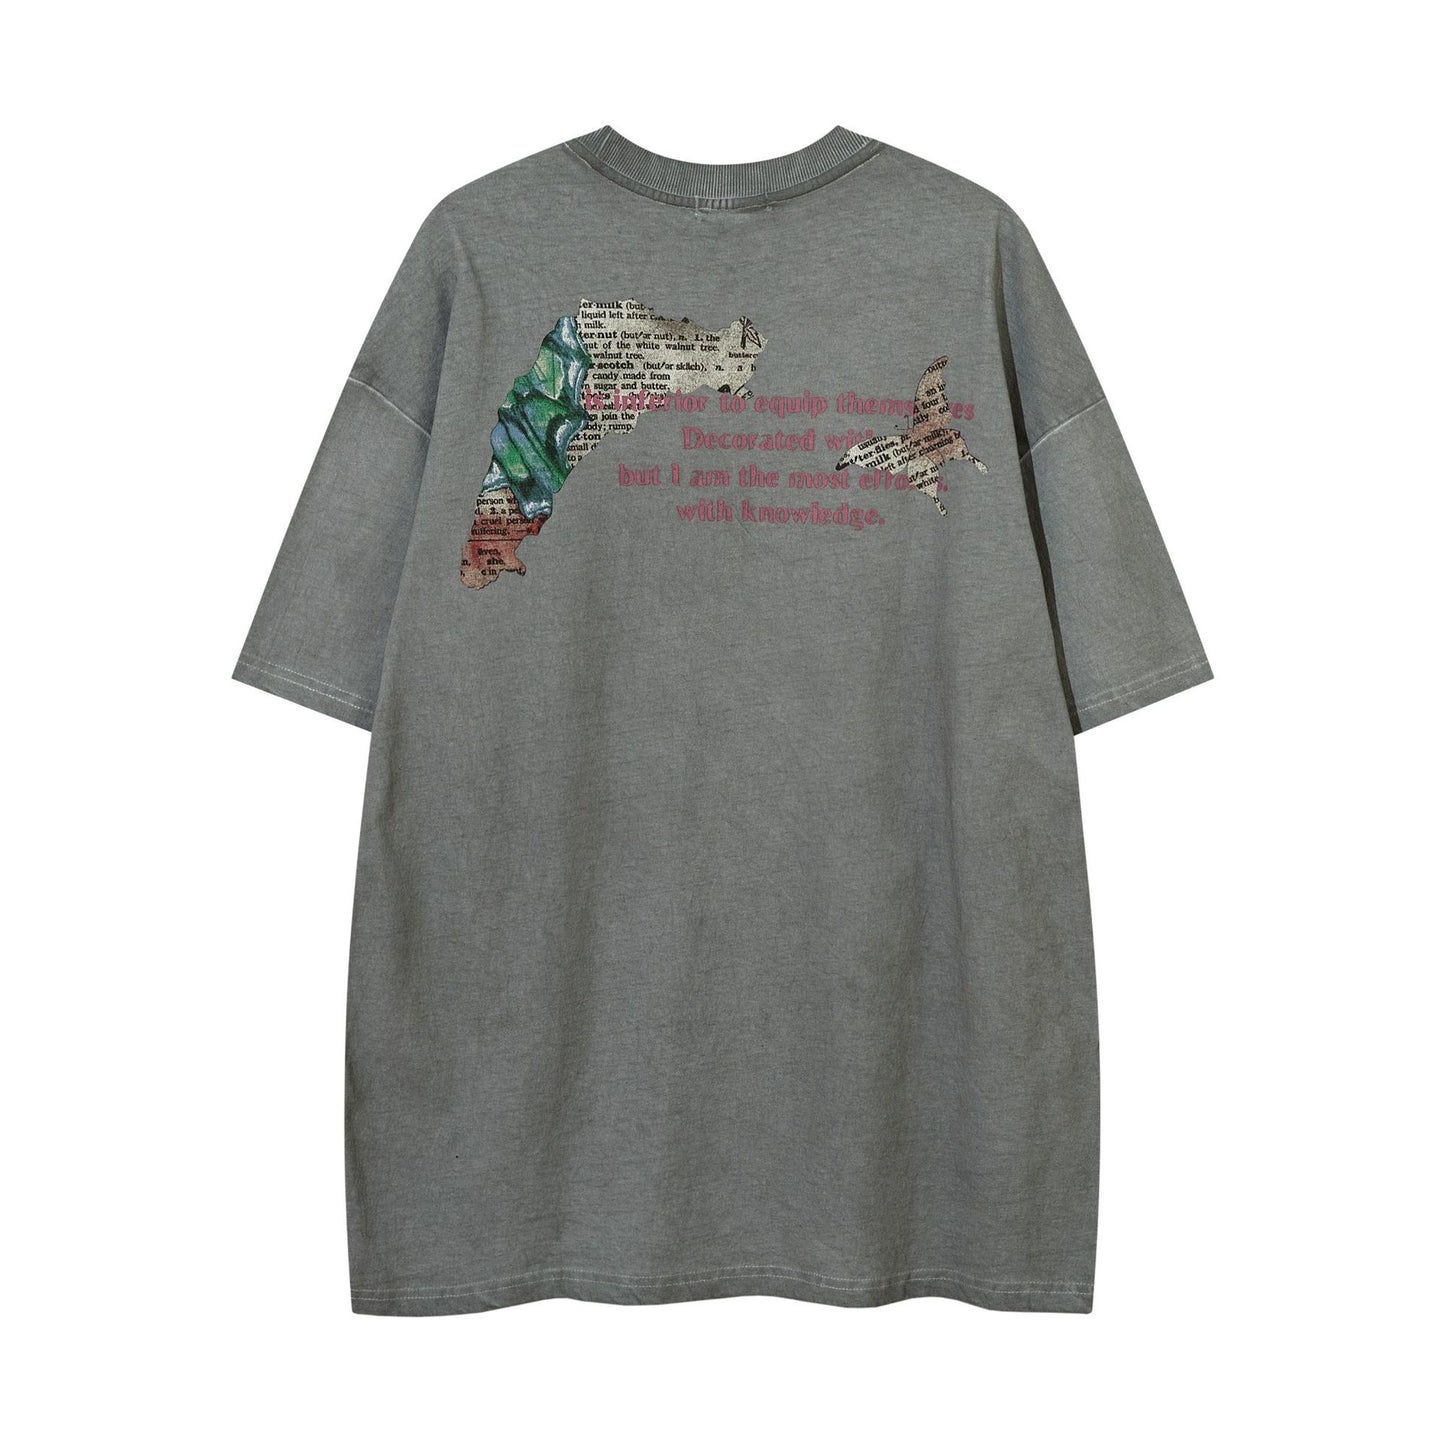 Top Washed-out Vintage Distressed High Street T-shirt